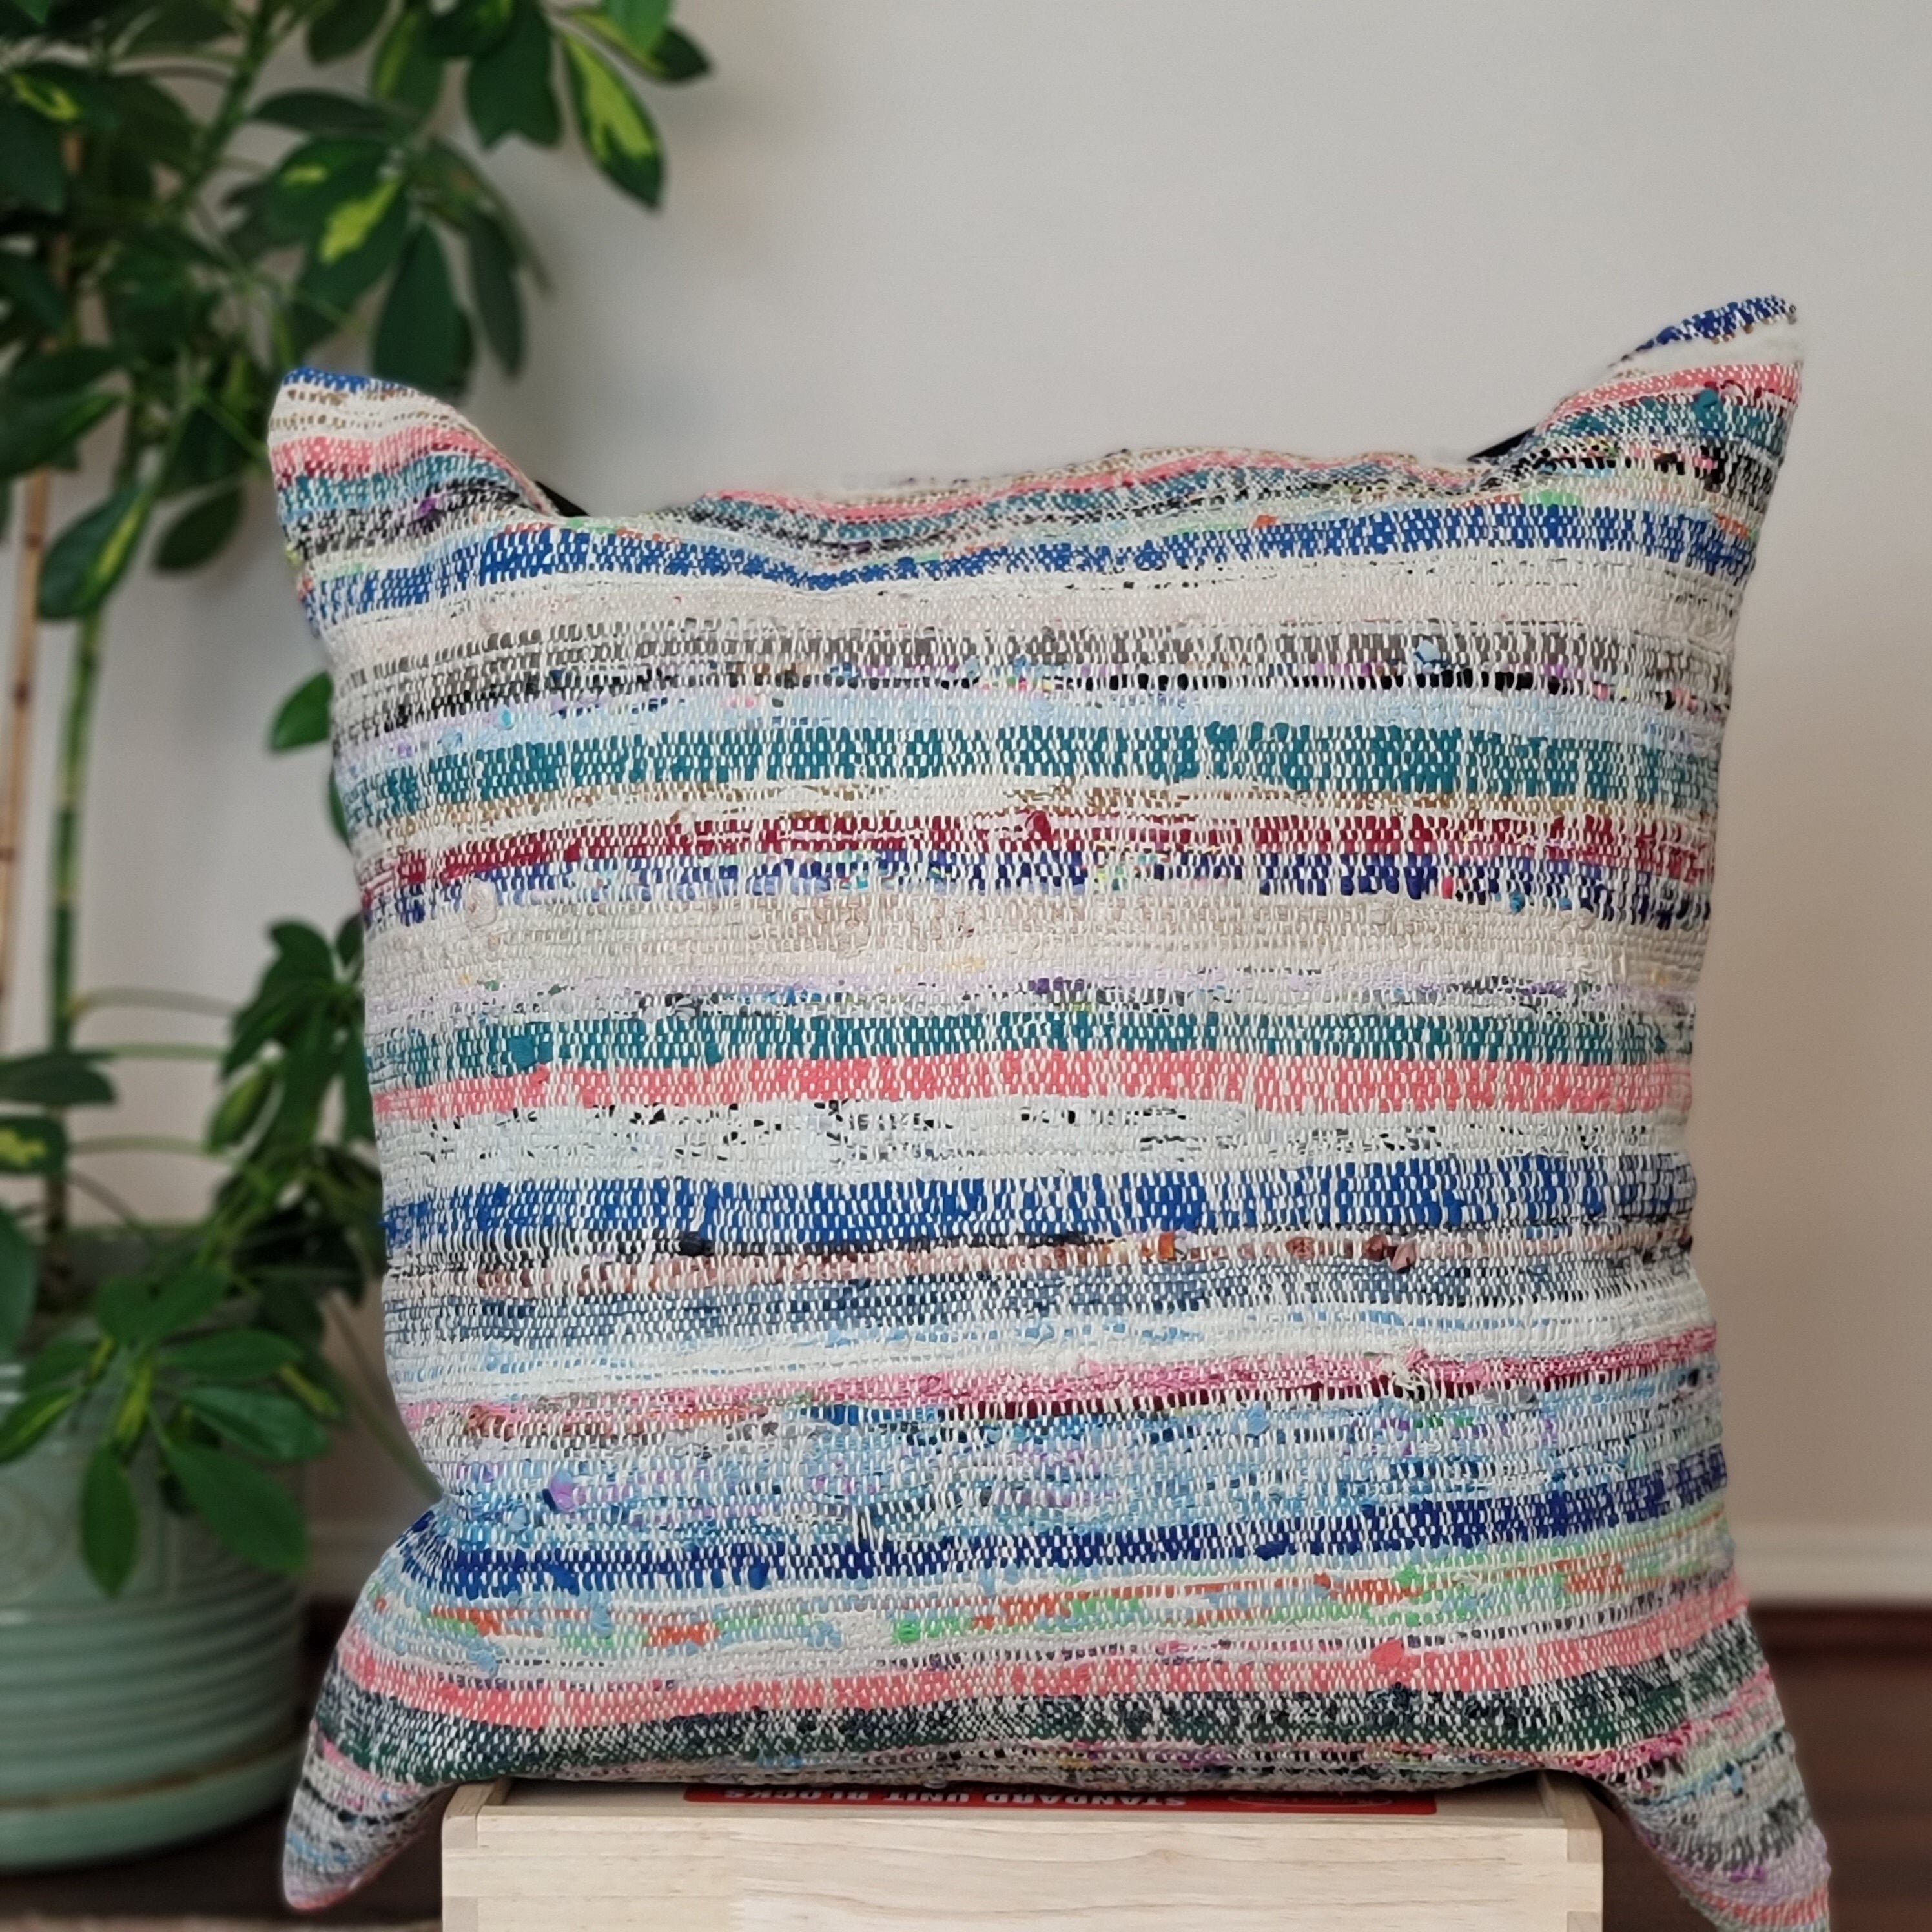 23x23 inch Kilim Pillow Cover Handmade Kilim Pillow from Etsy